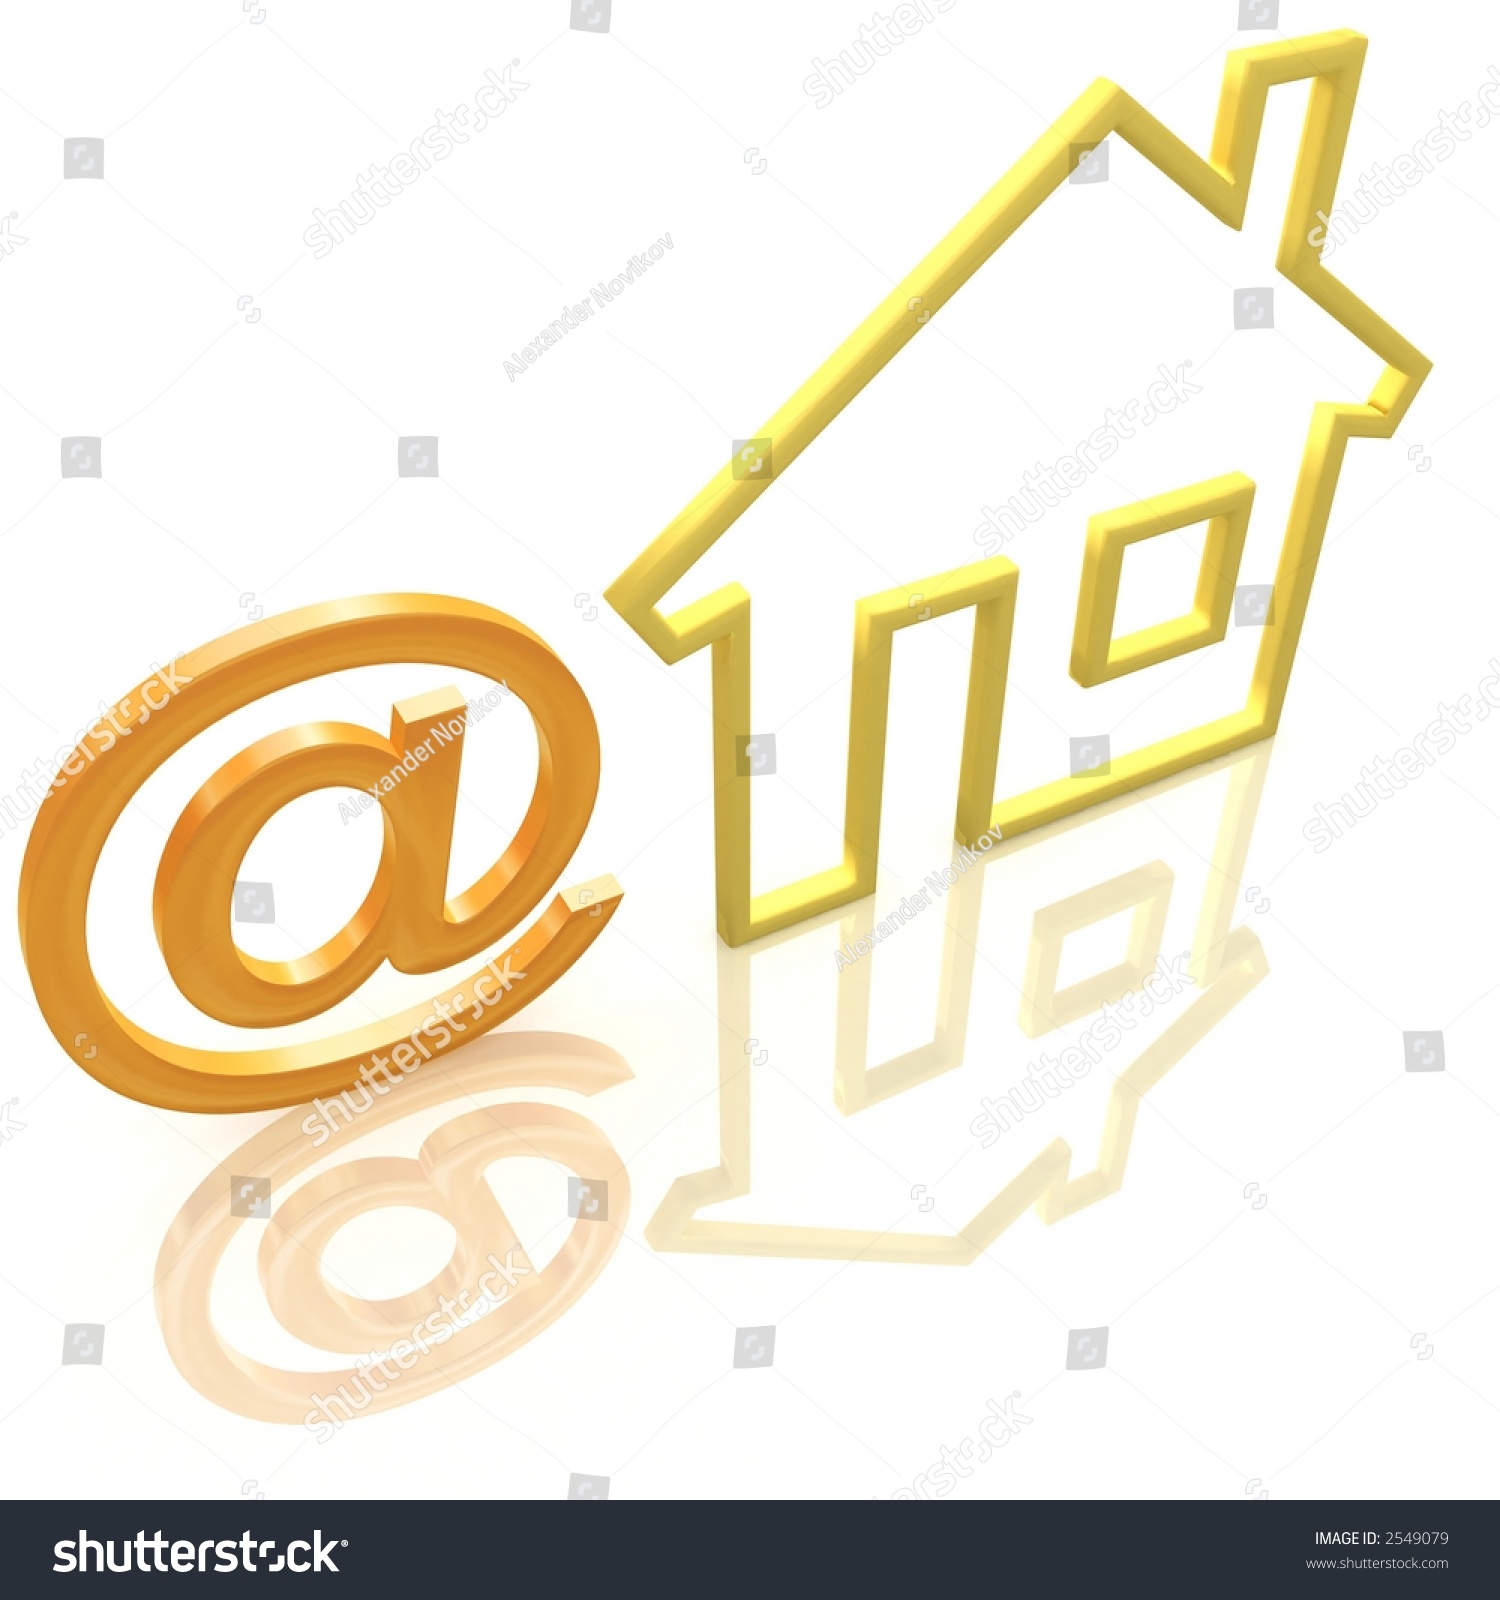 At Home, Logo Stock Photo 2549079 : Shutterstock